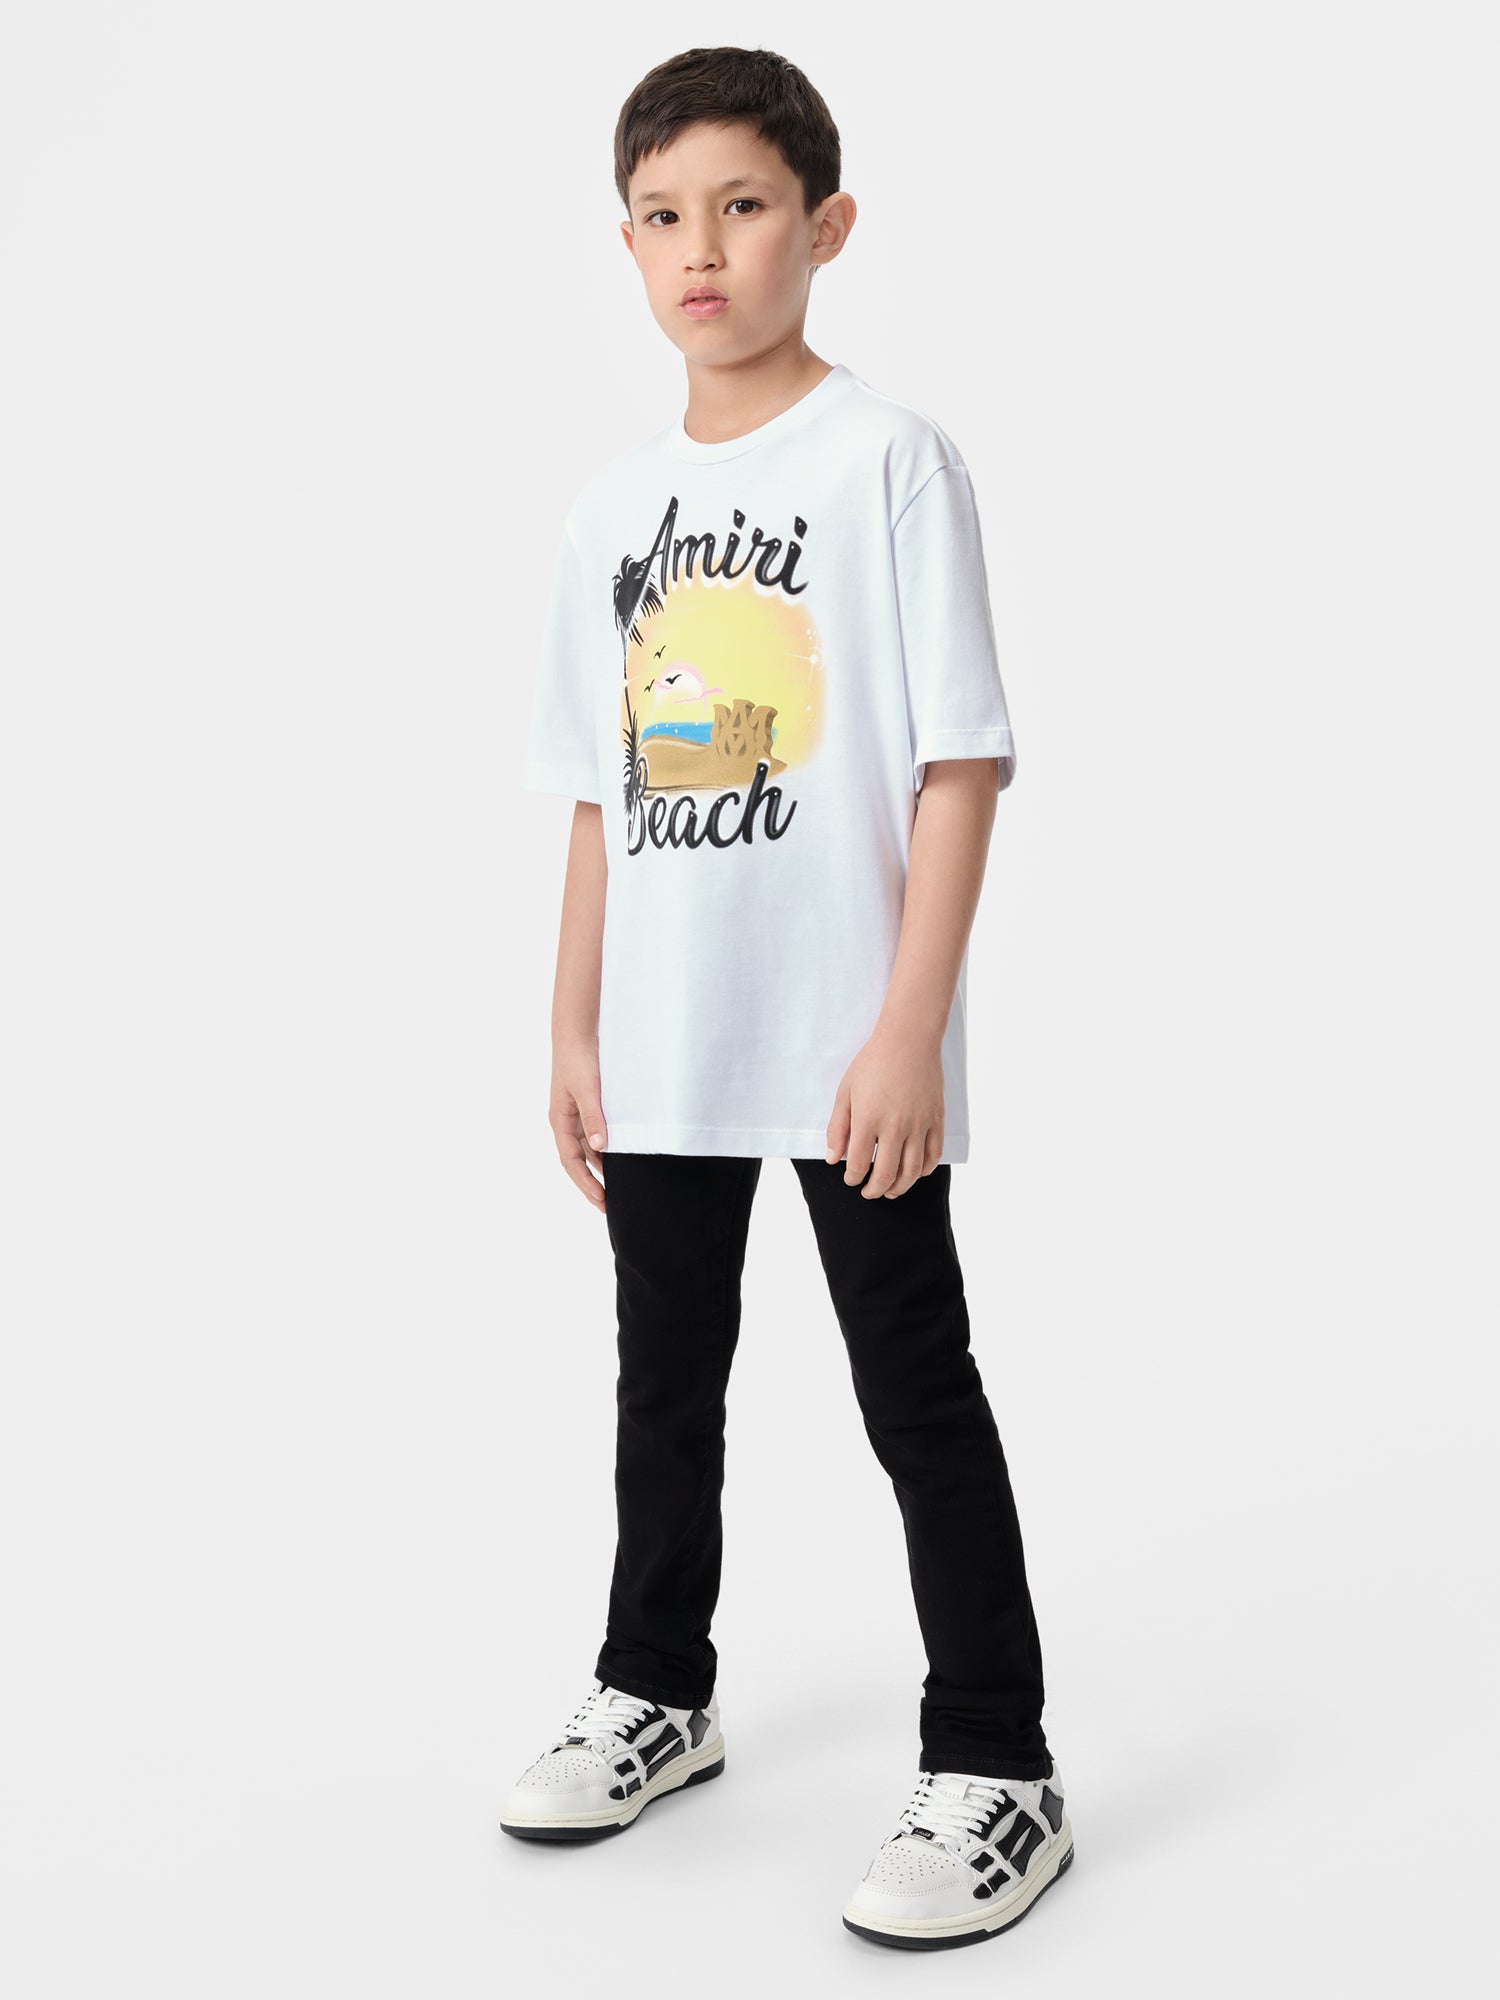 Product KIDS - MA SANDCASTLE TEE - White featured image